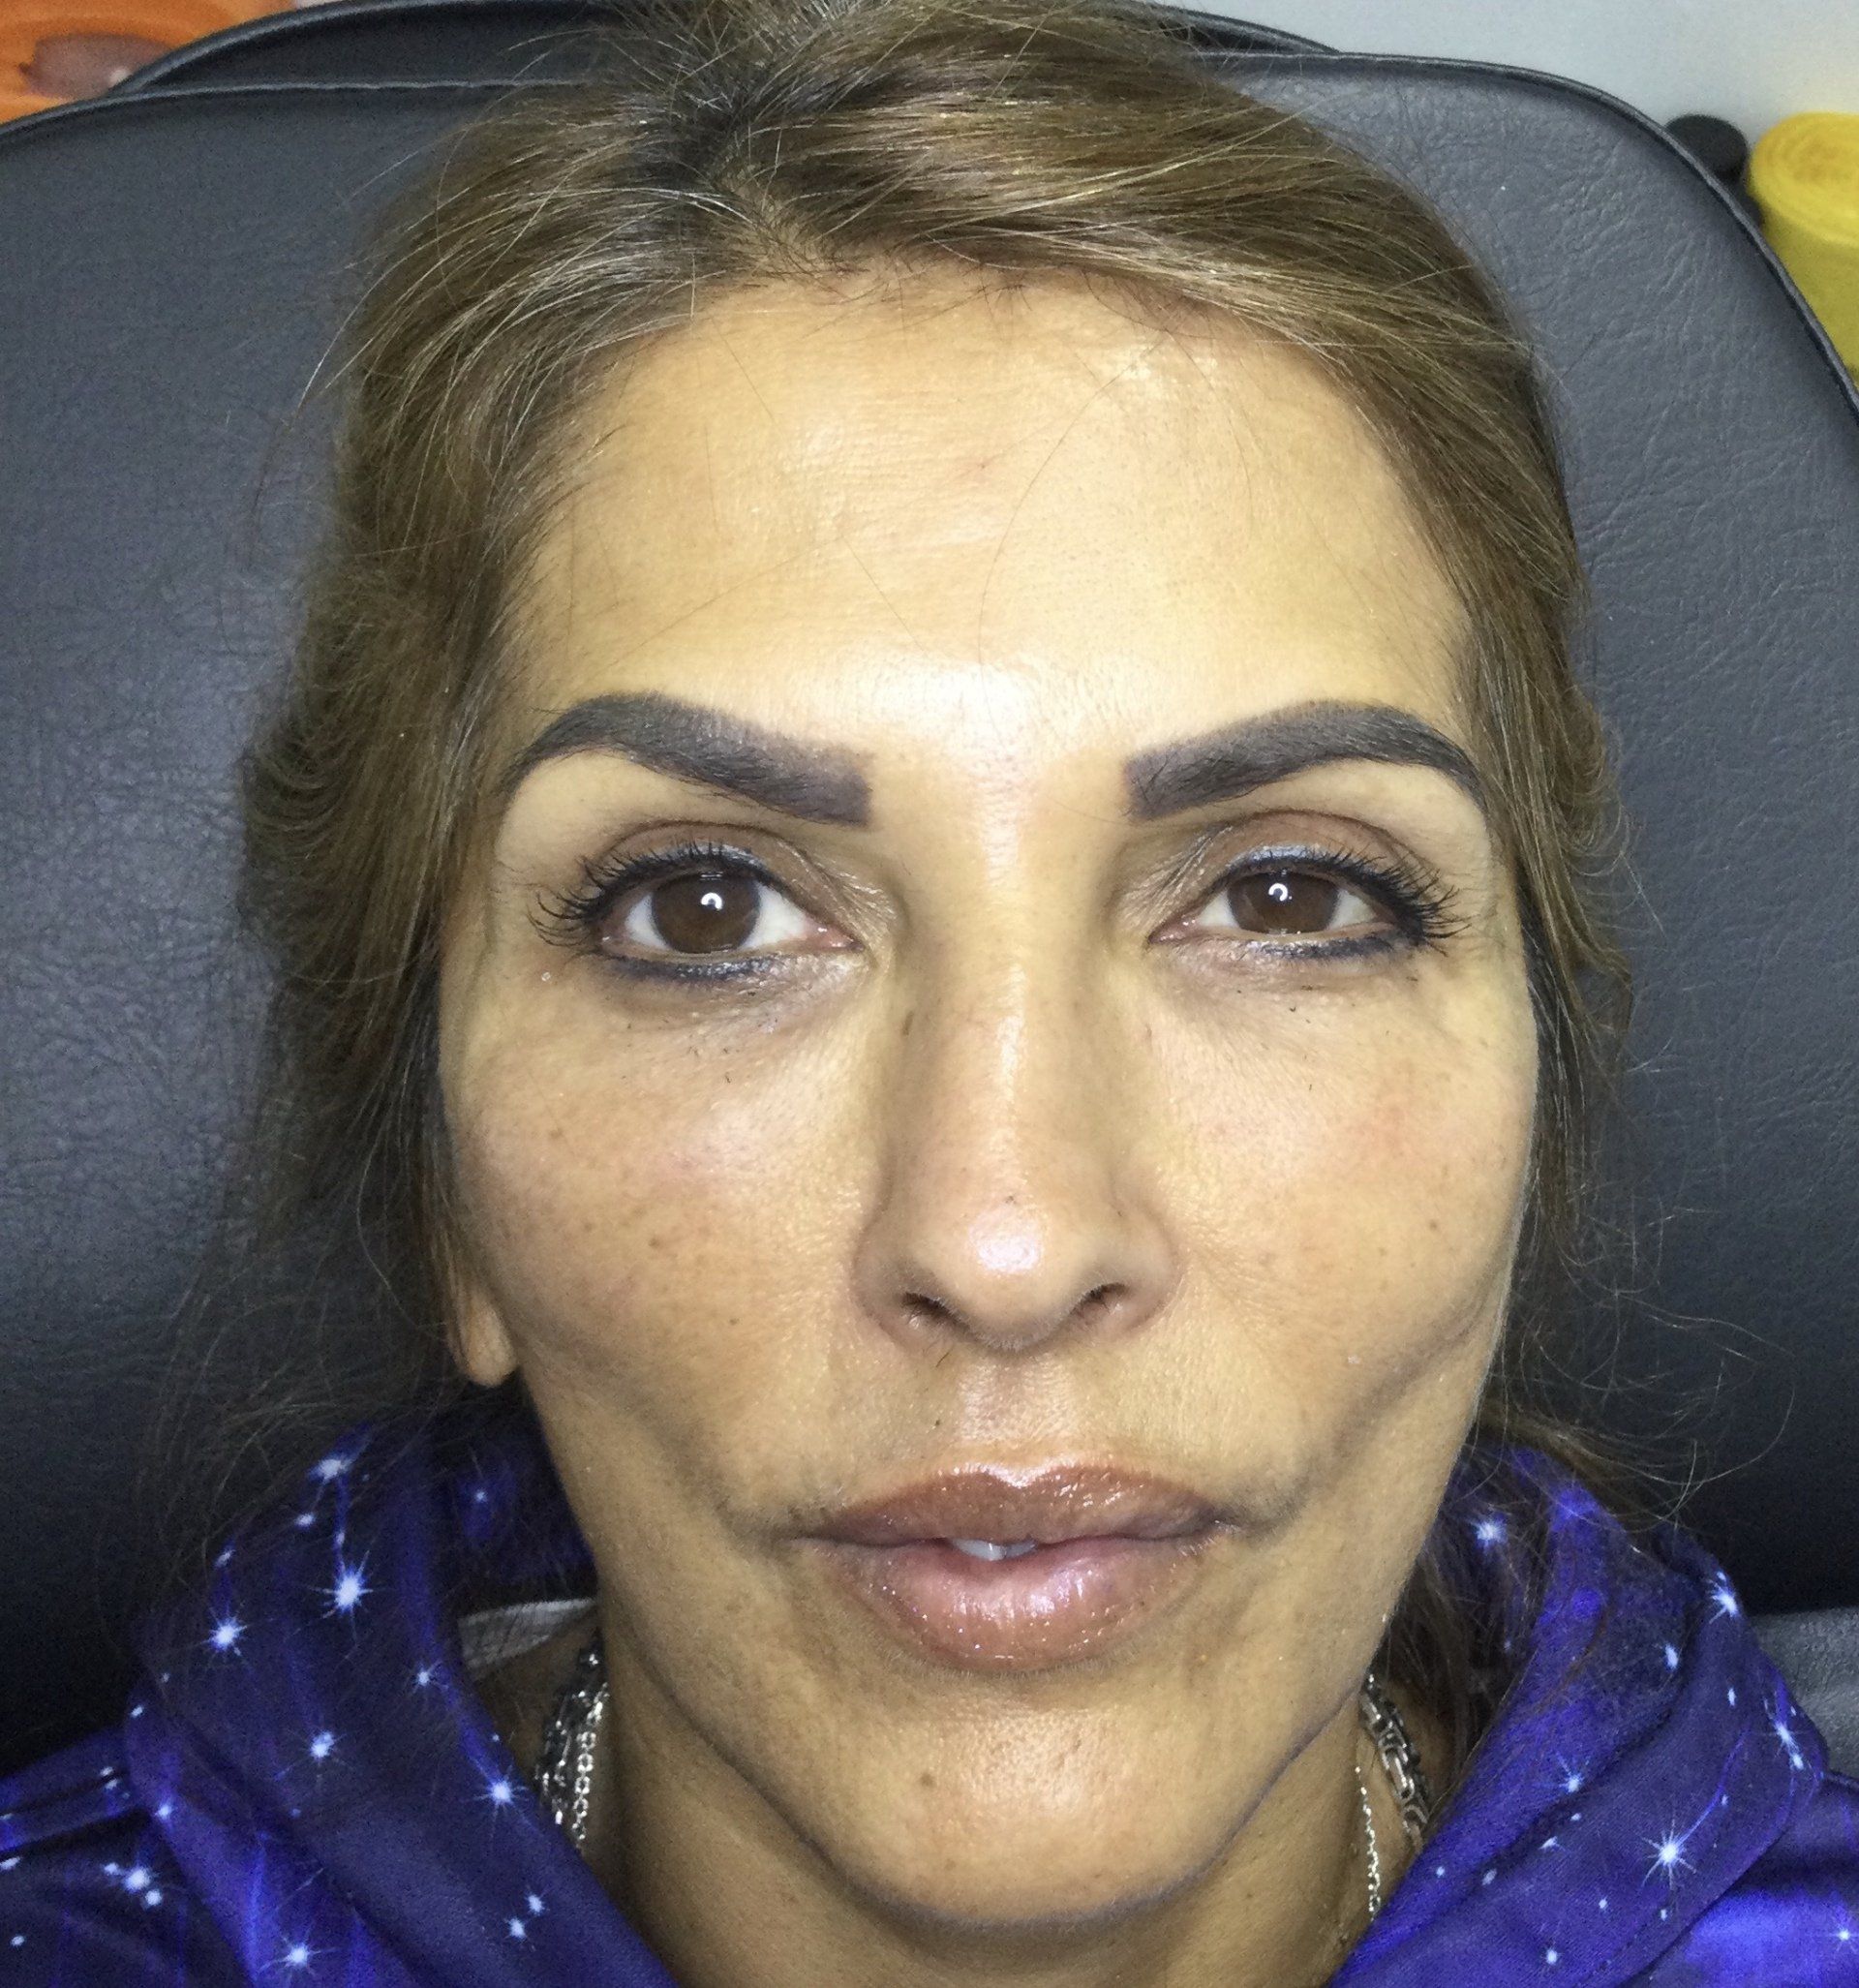 after skin boosting injections, tear through fillers and anti wrinkle injections - After